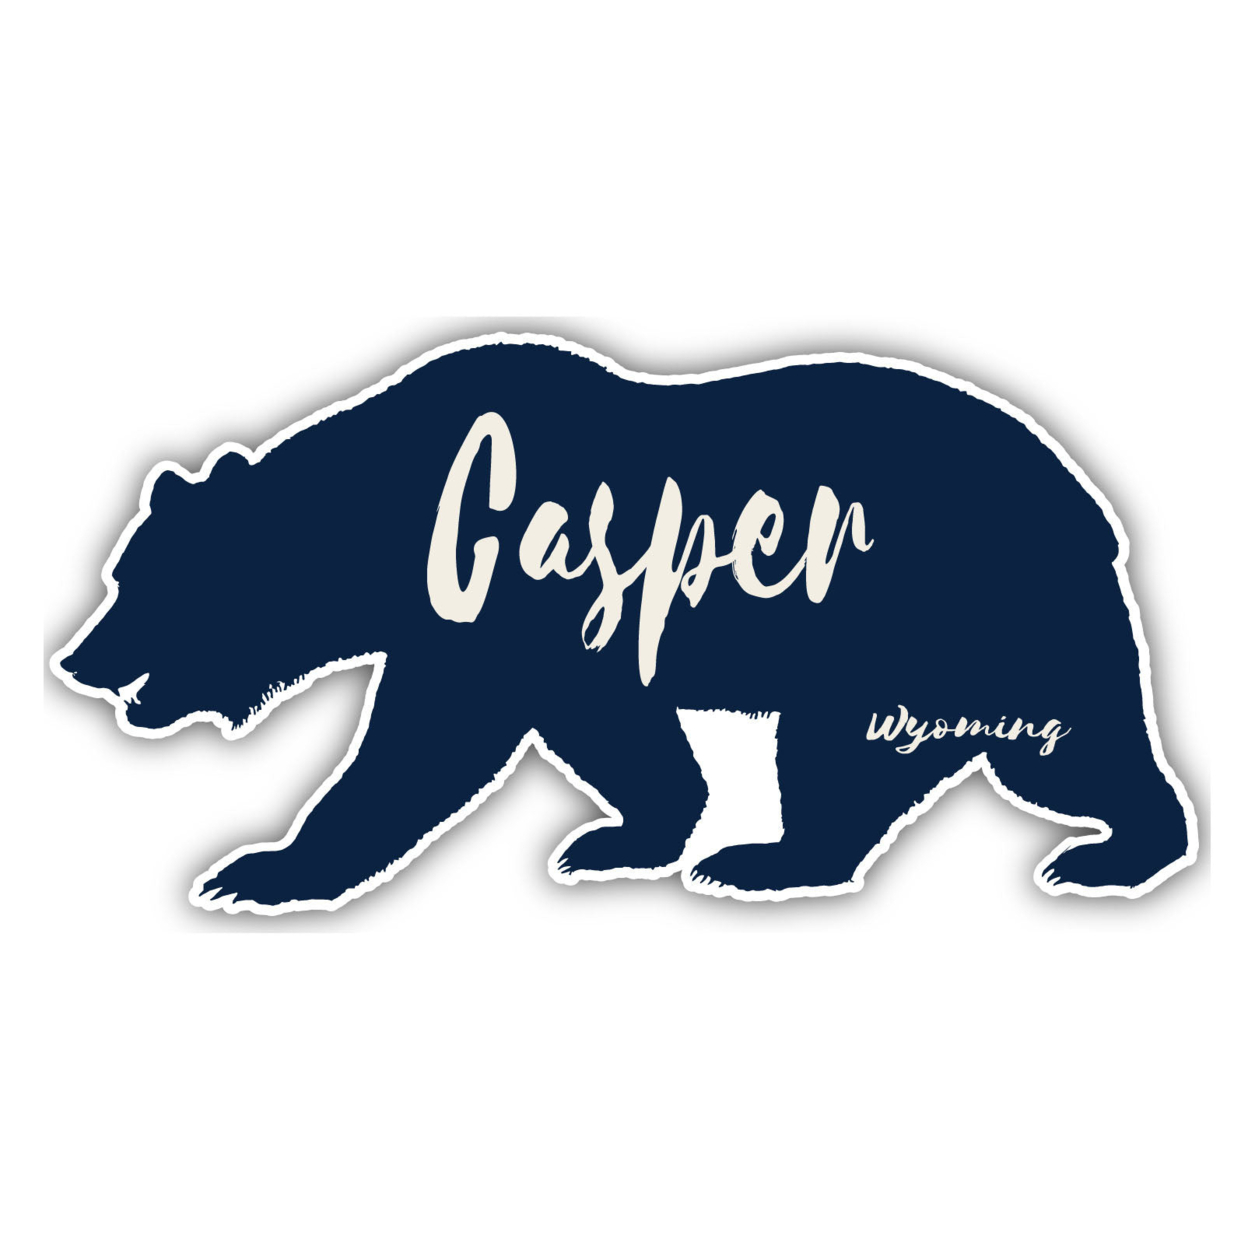 Casper Wyoming Souvenir Decorative Stickers (Choose Theme And Size) - 4-Pack, 8-Inch, Tent